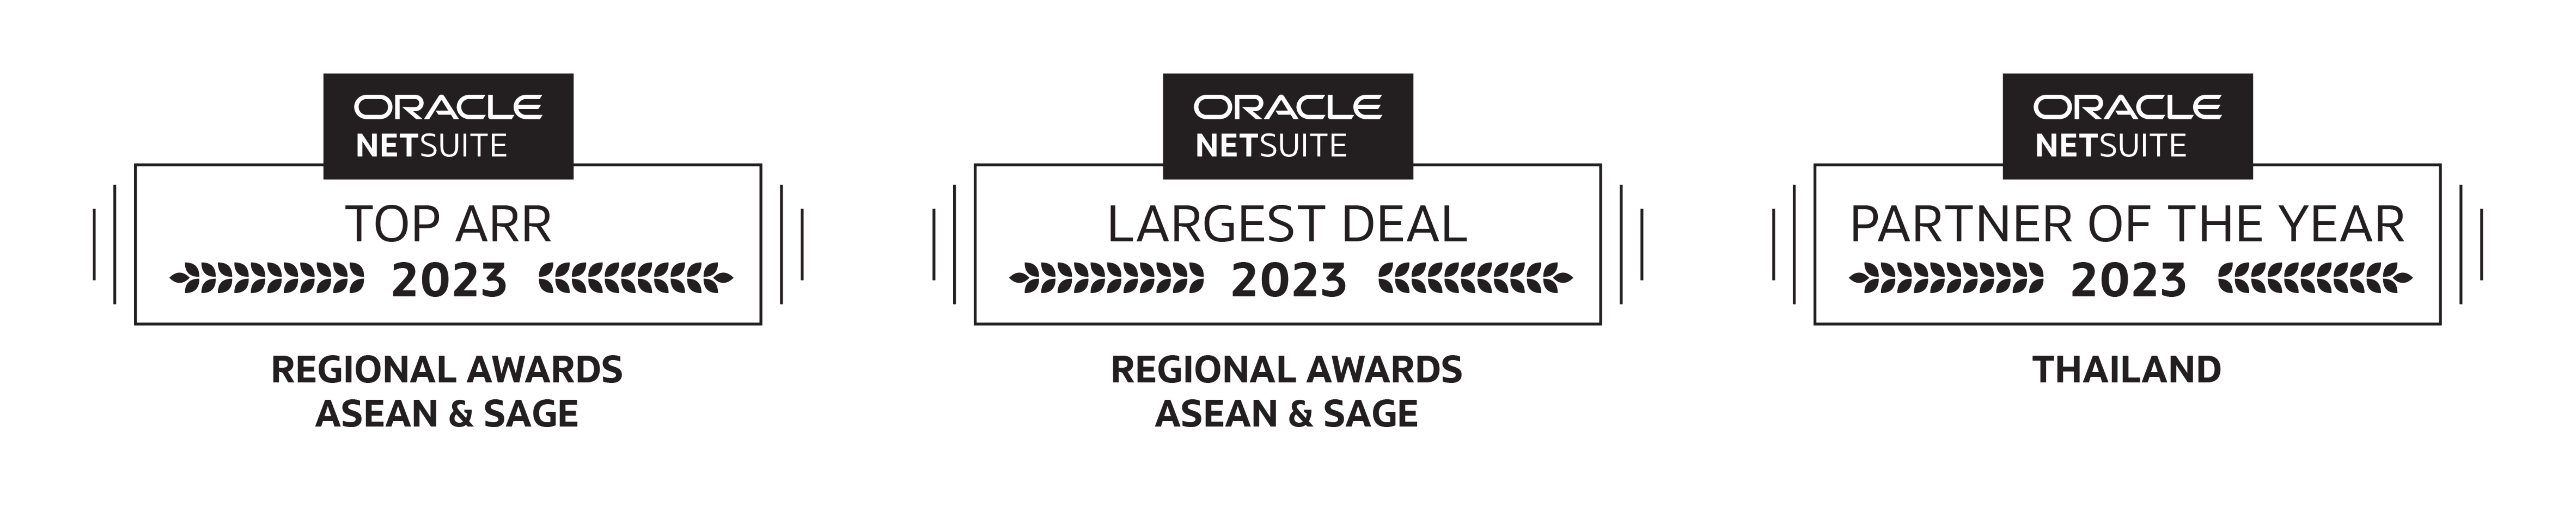 Oracle_Toparr_Regional 2023